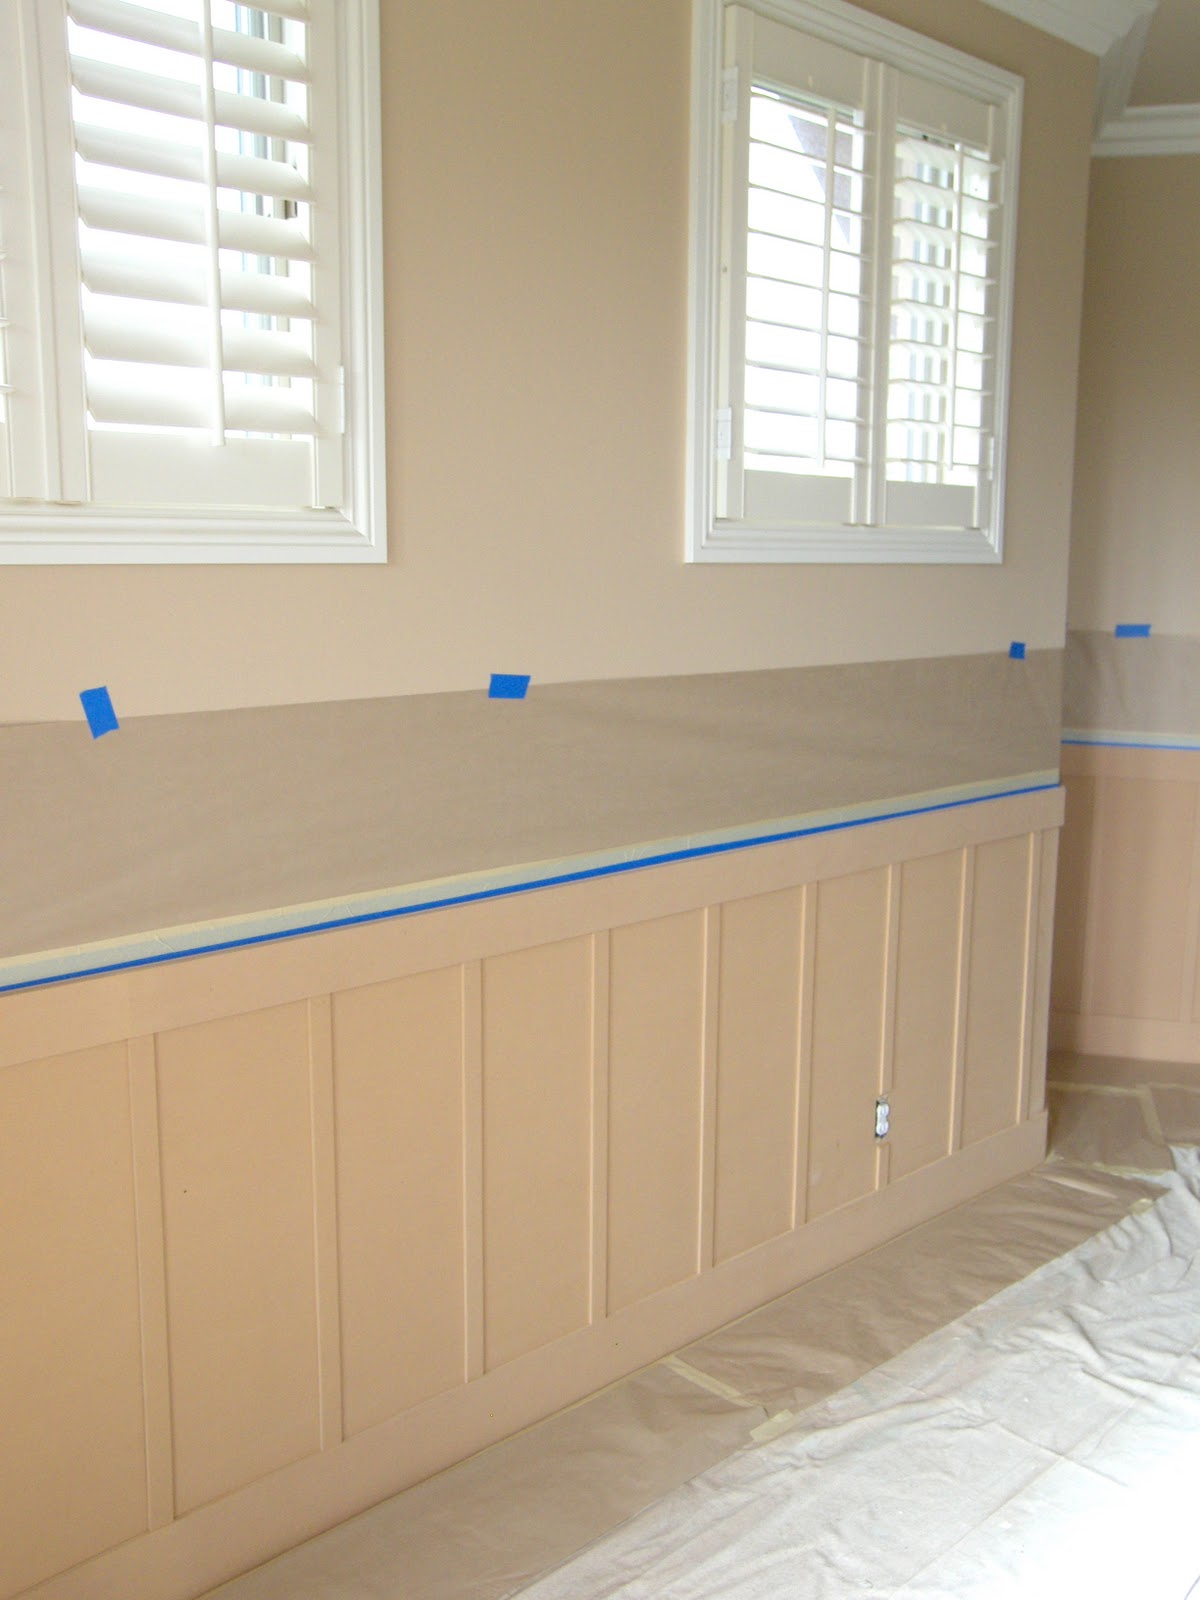 Designs Design Style Project Master Bedroom Remodel Wainscot